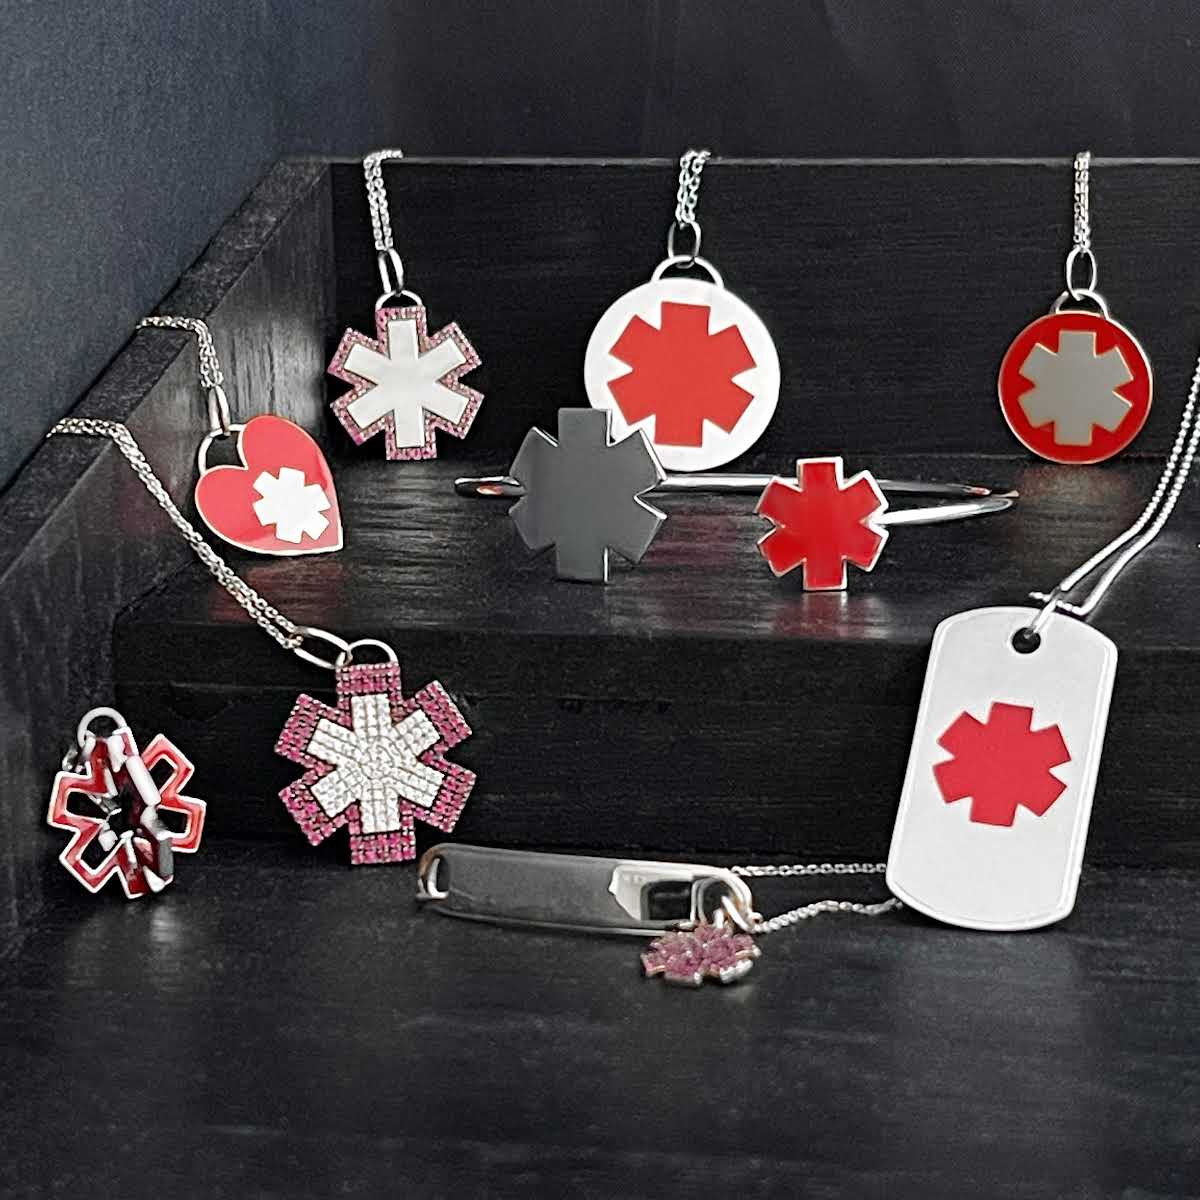 White Gold & Red Enamel Medical Alert Necklace & Bracelet Collection | Engraved Medical ID Pendant Charm | Shop CHARMED Medical Jewelry